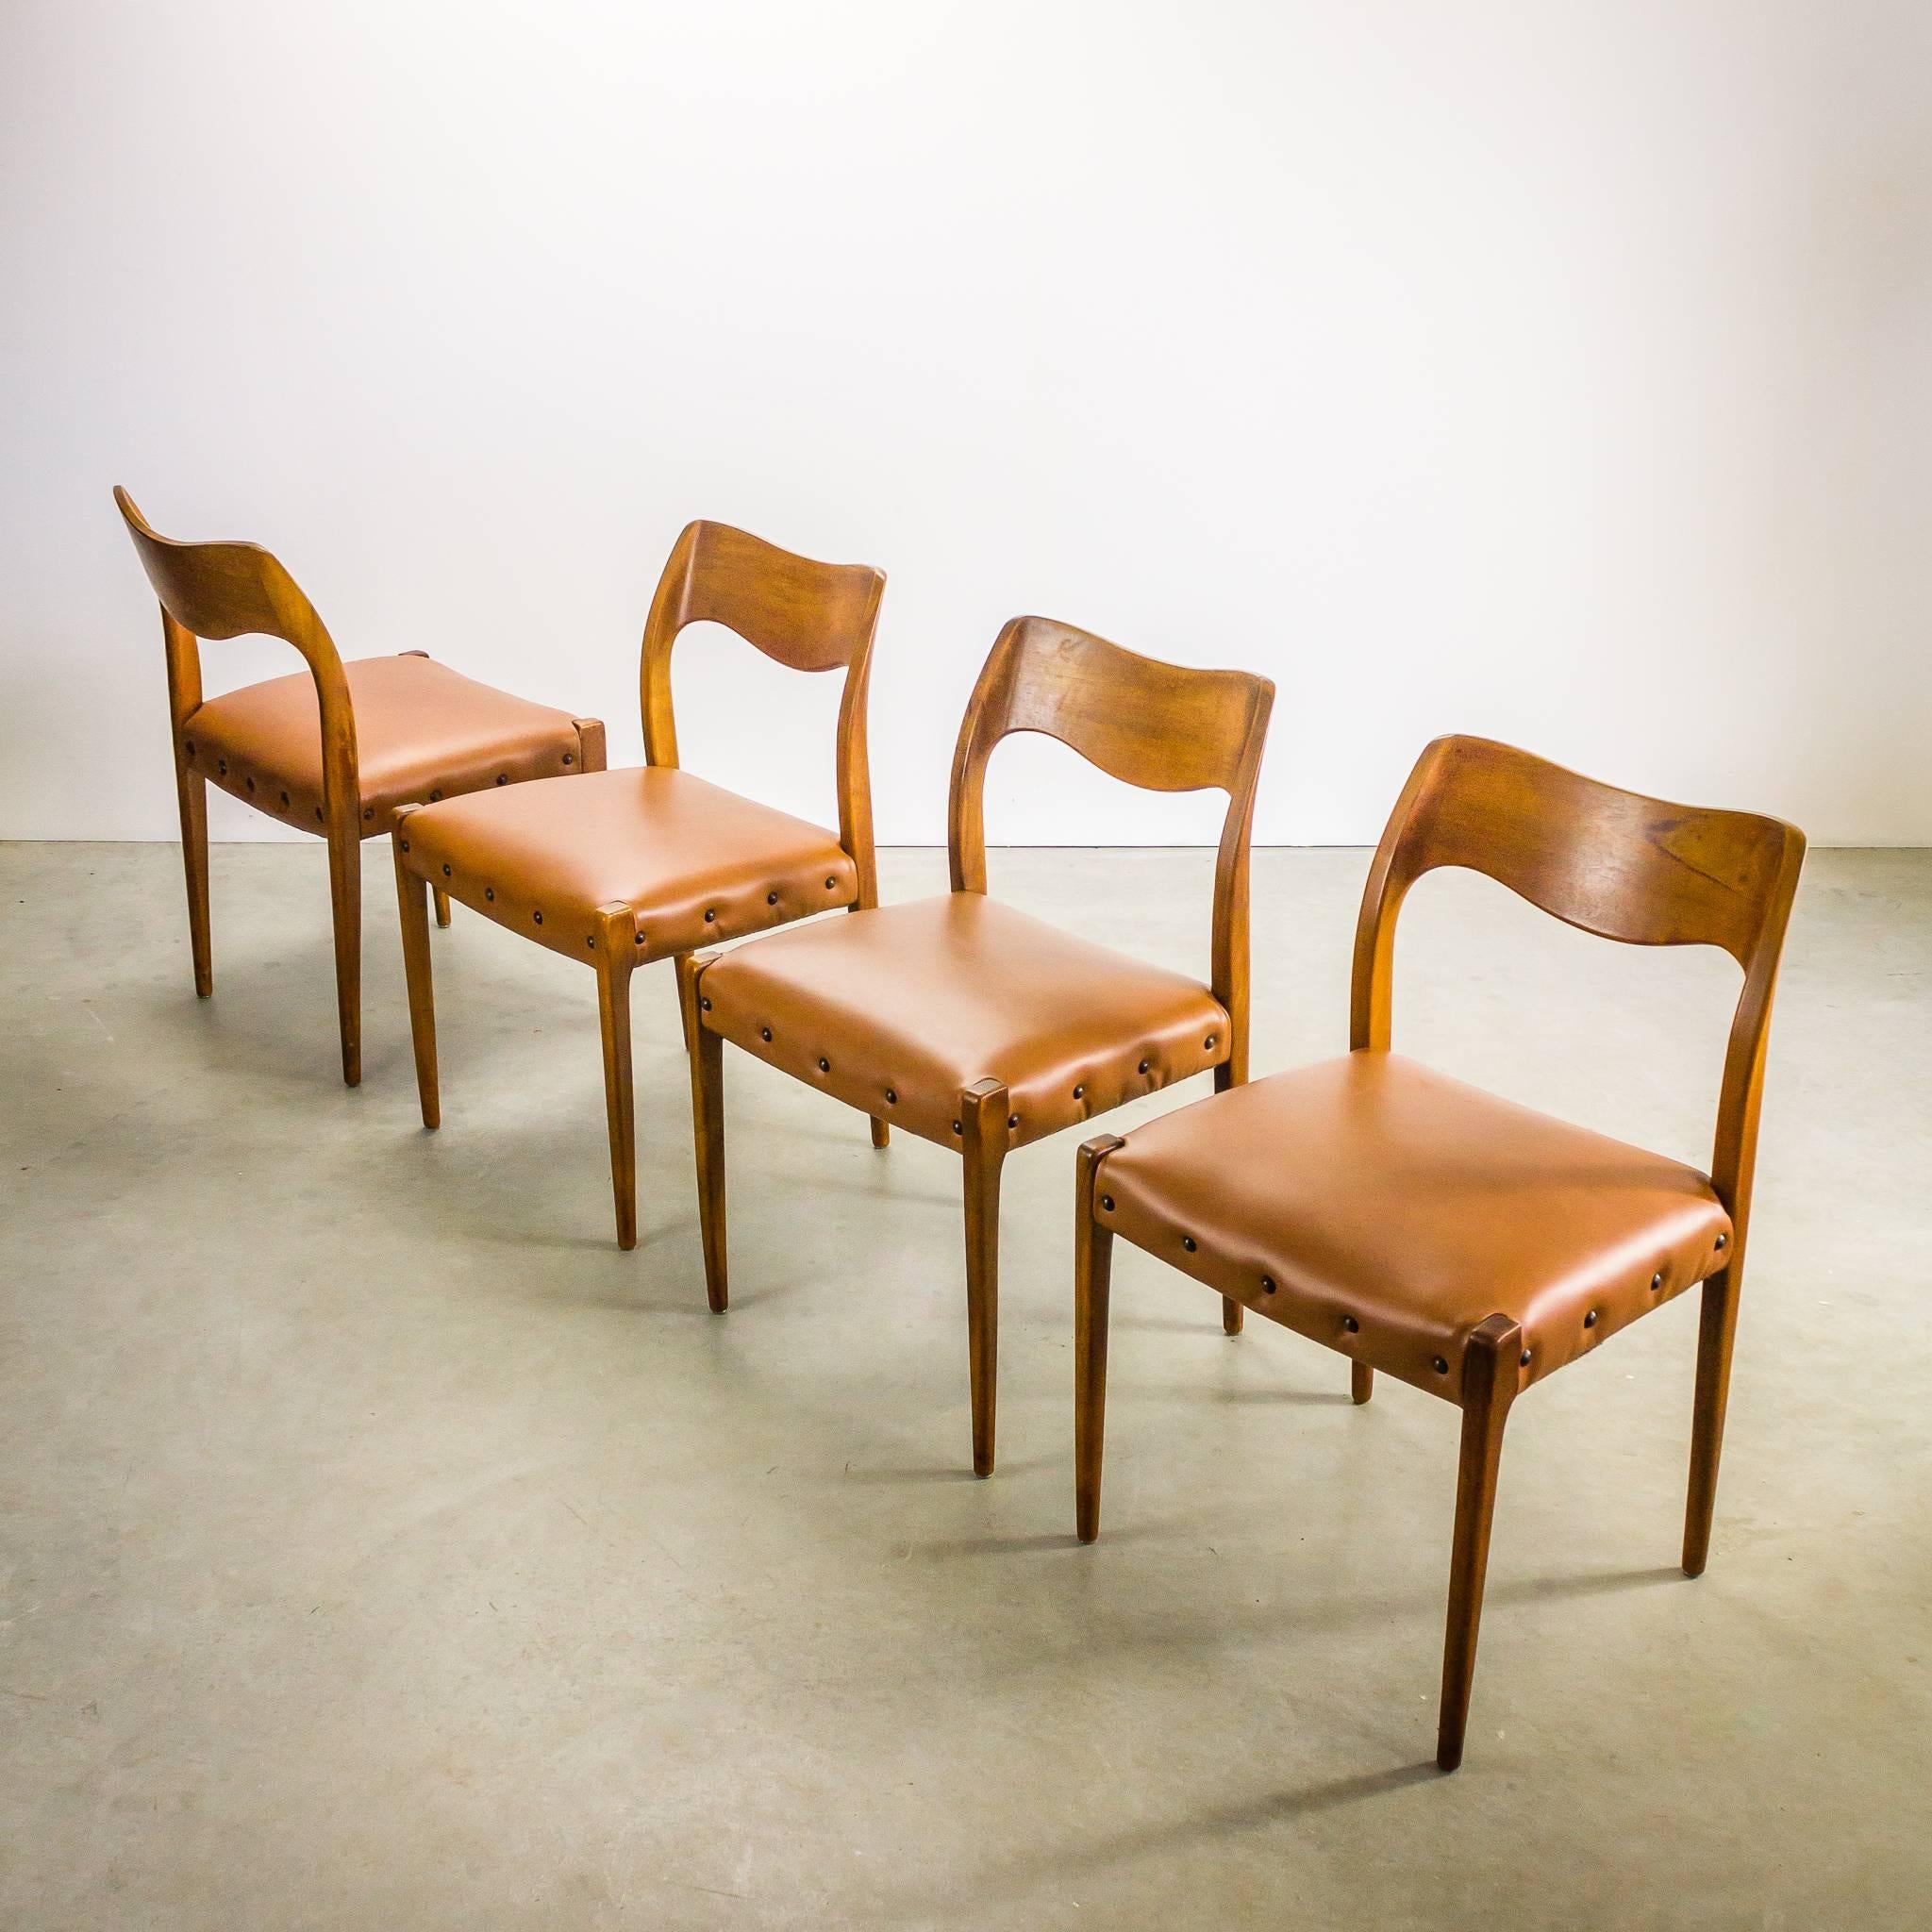 One set of four Niels Otto Møller nr 71 dining chairs with new skai upholstery in cognac brown. Set is in good condition, wear consistent with age and use.